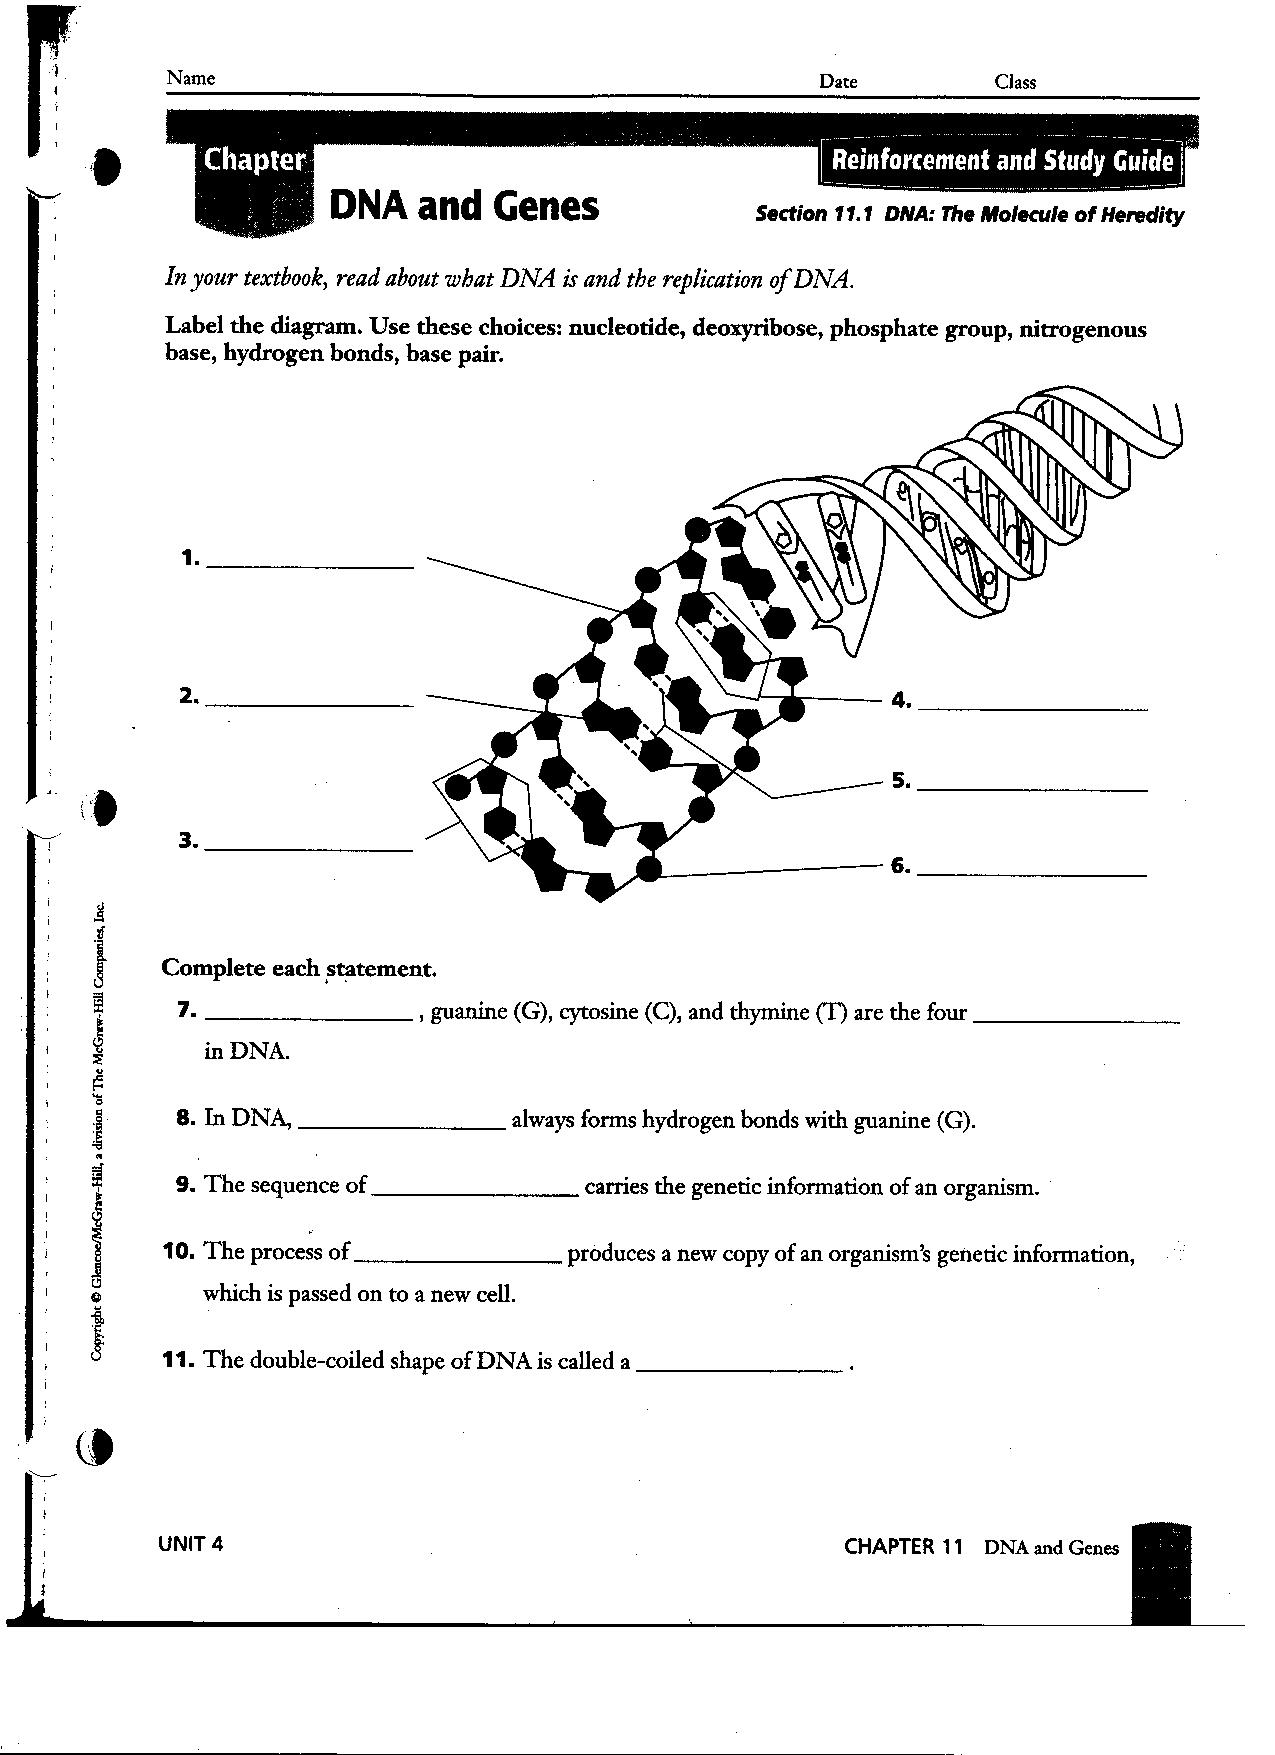 Chapter 11 DNA and Genes Worksheet Answers Image